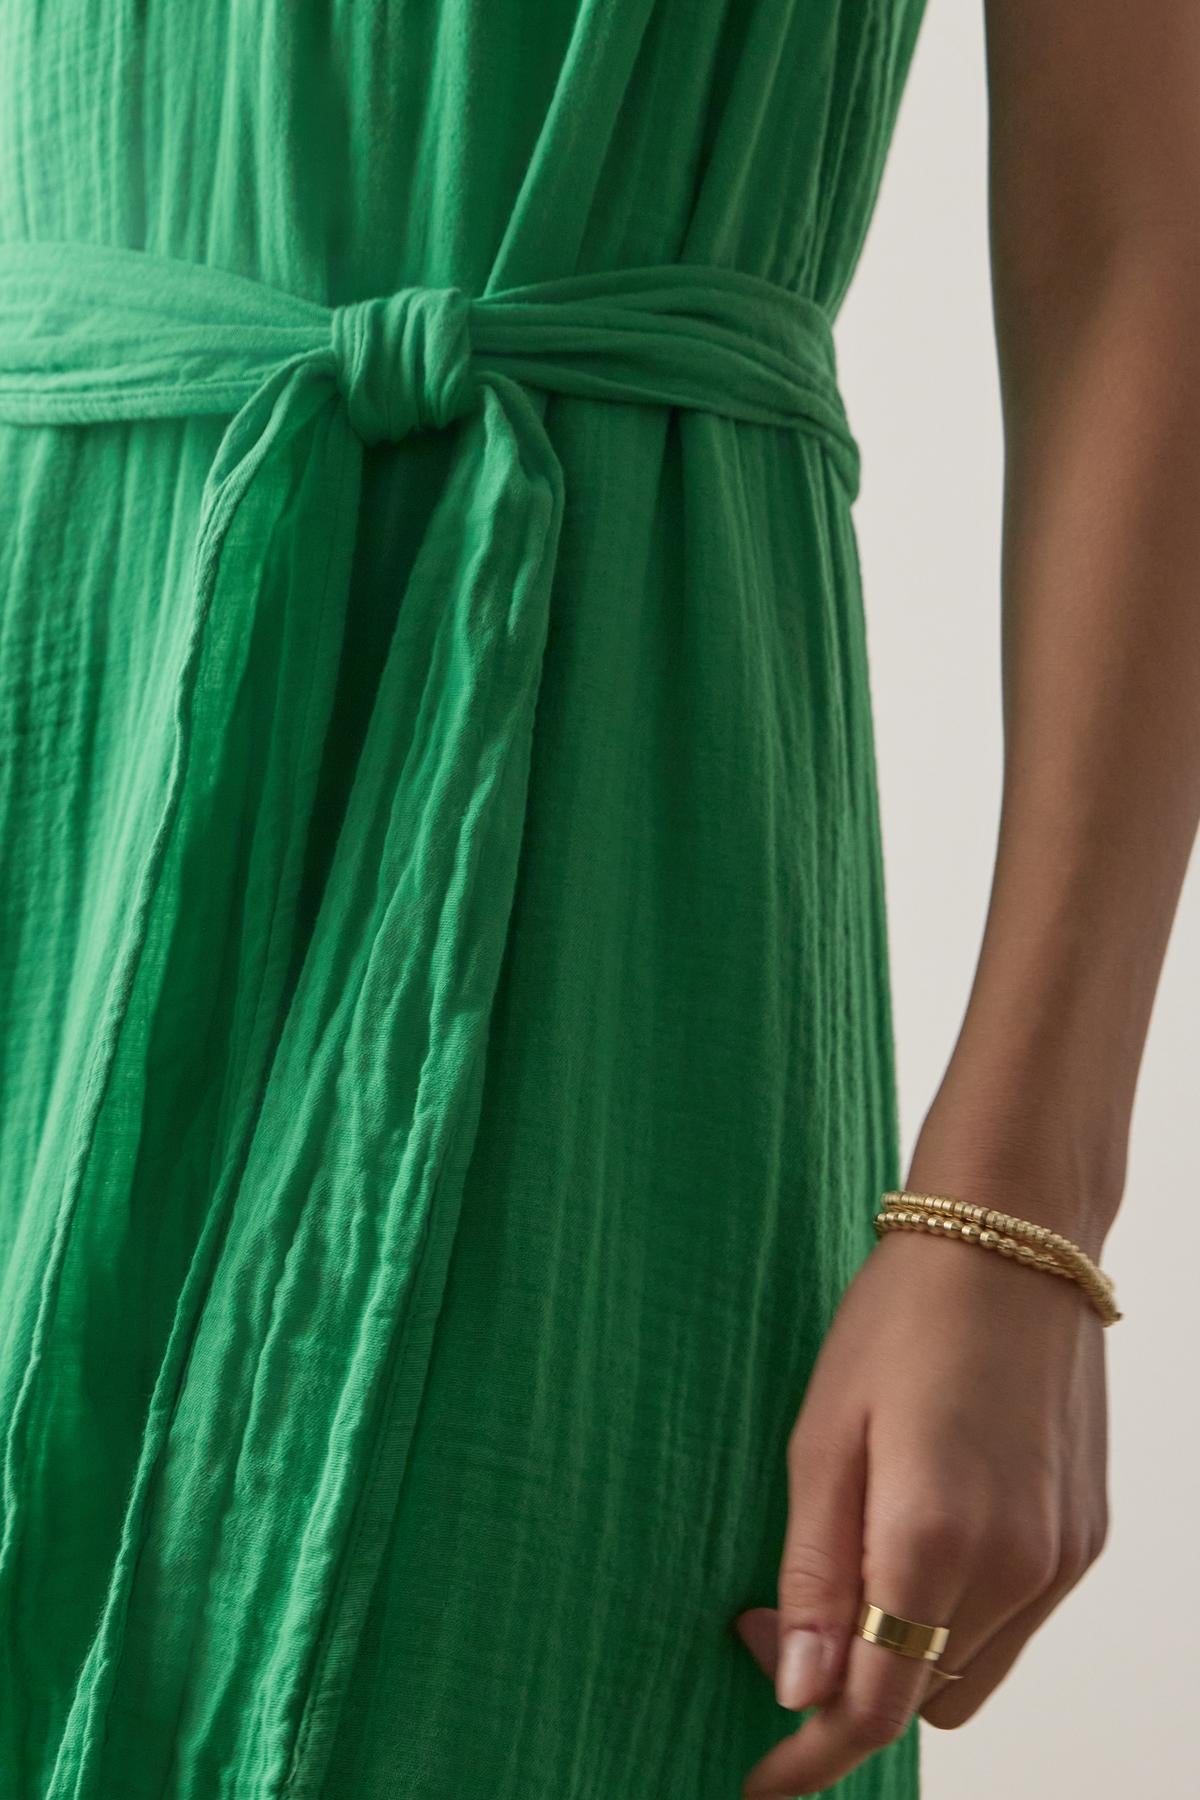 Close-up view of a person wearing a green cotton gauze Carrillo dress by Velvet by Jenny Graham with a knotted waist detail, accessorized with gold bracelets.-36863272059073